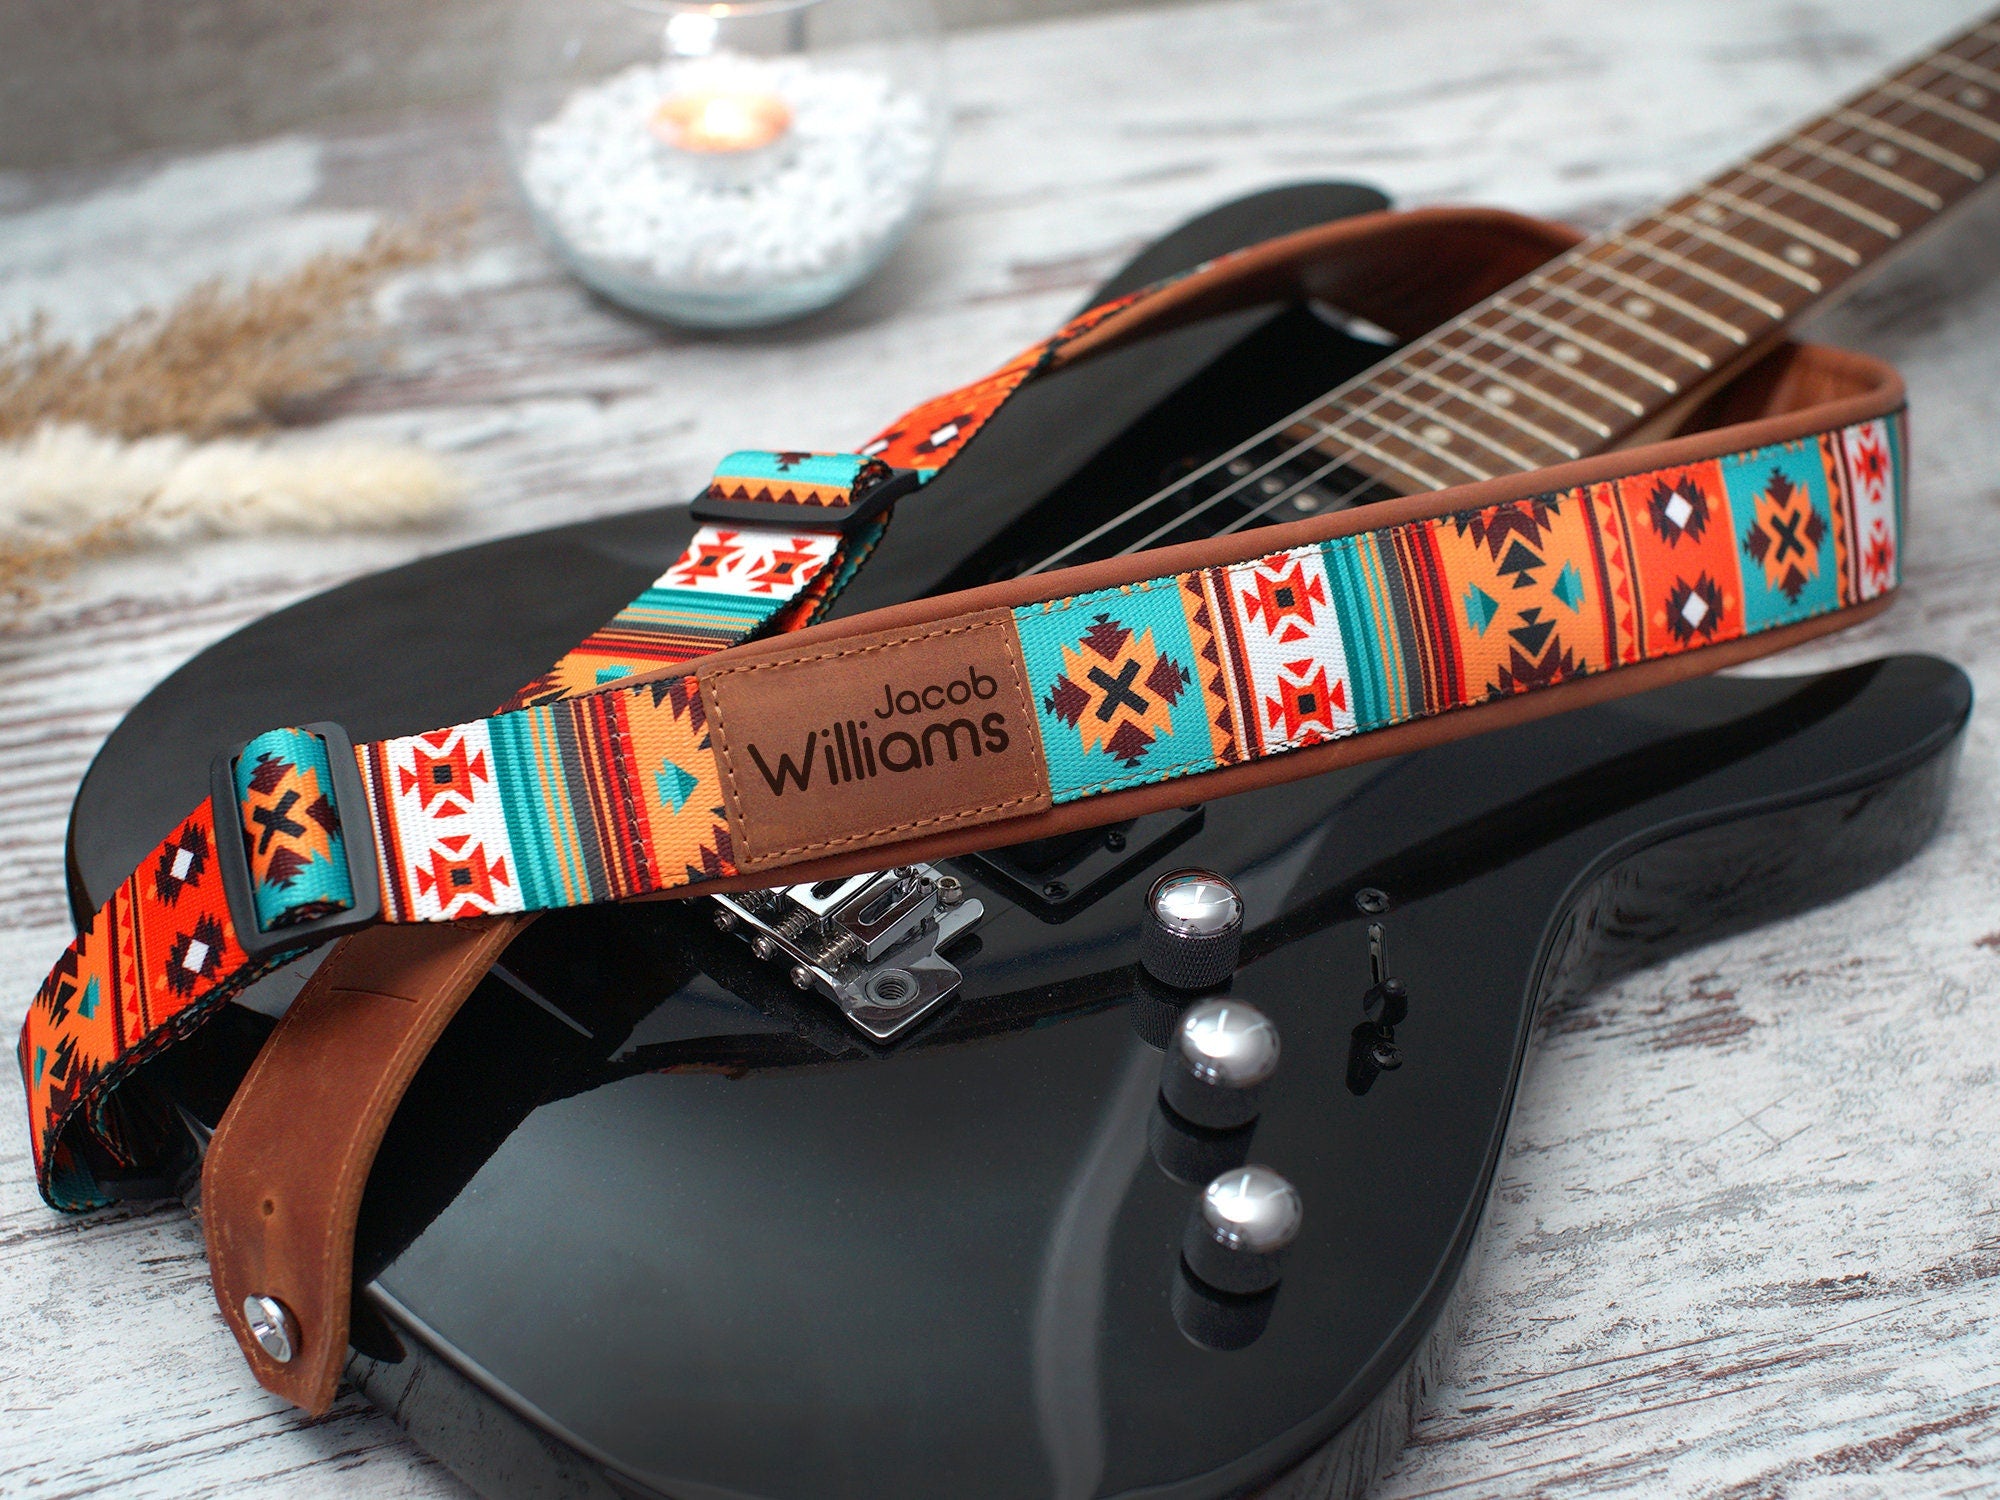 Handmade Leather Guitar Straps - The Duncan Africa Society